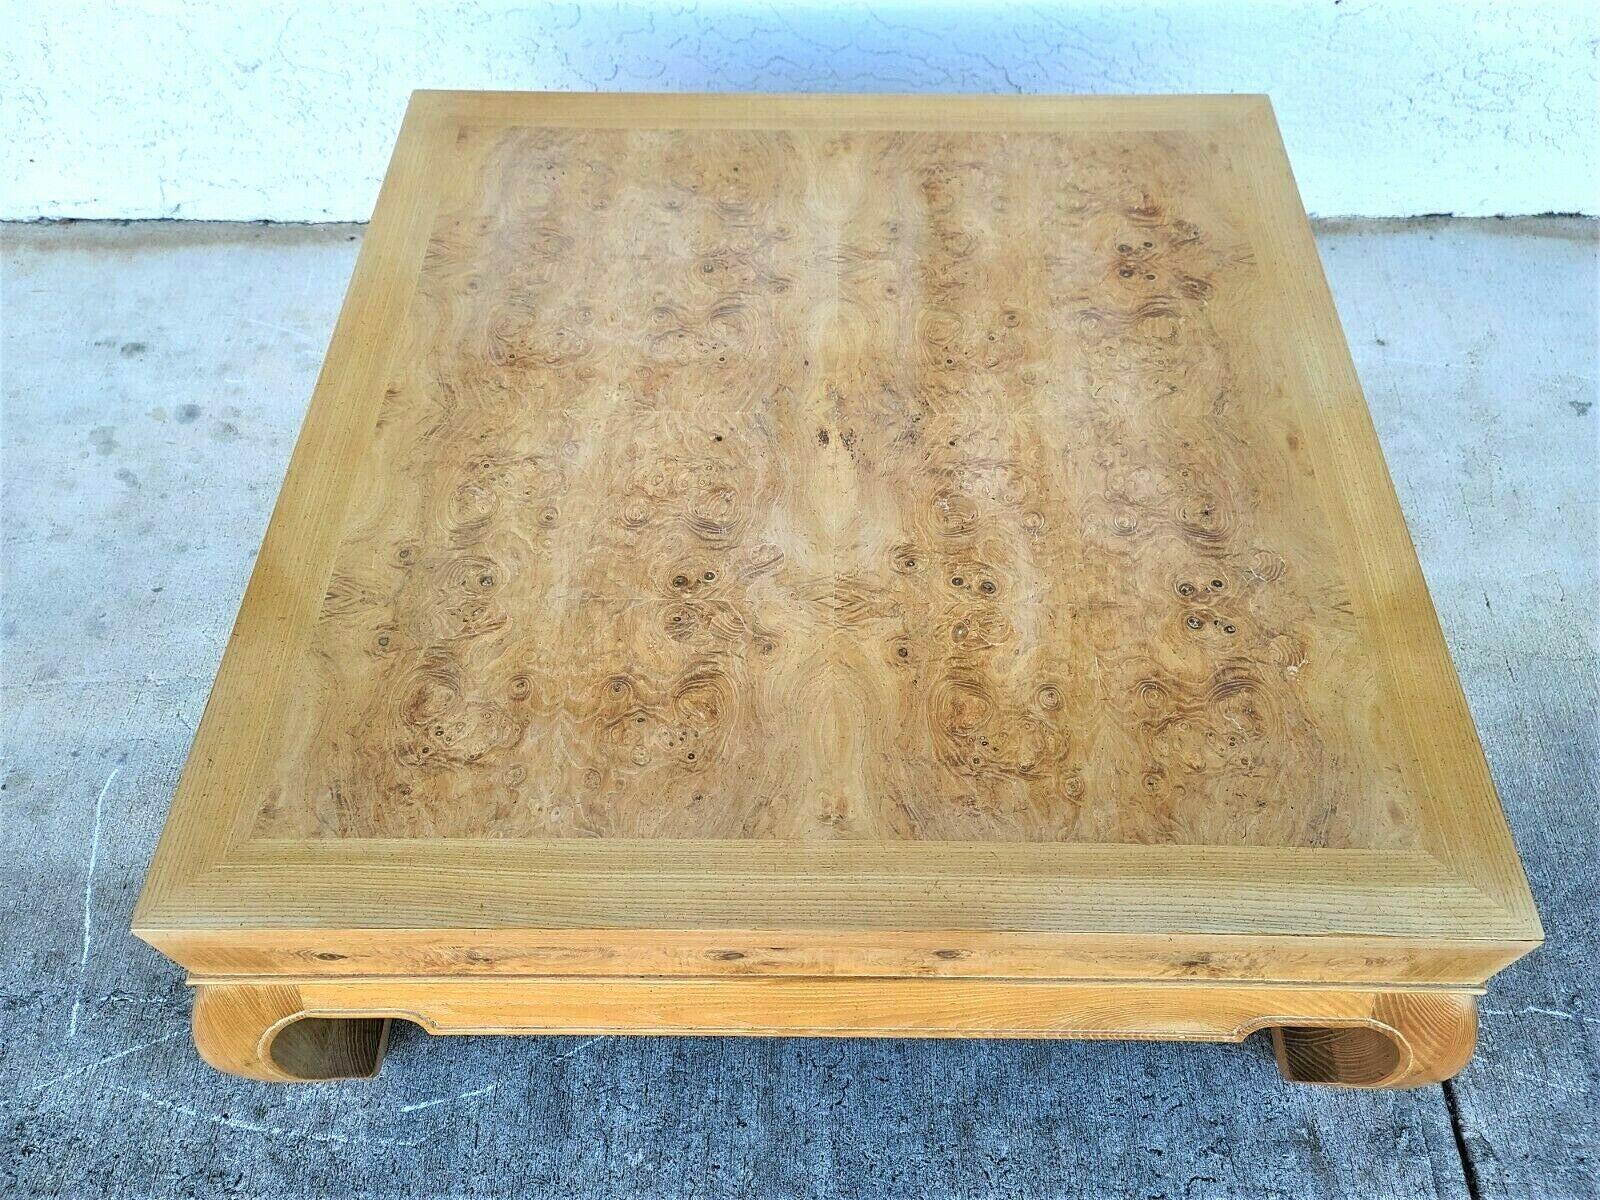 Offering one of our recent palm beach Estate fine furniture acquisitions of a
Drexel heritage Ming Asian olive burl wood coffee table
It has the Drexel tag underneath.

Approximate measurements in inches
15.25